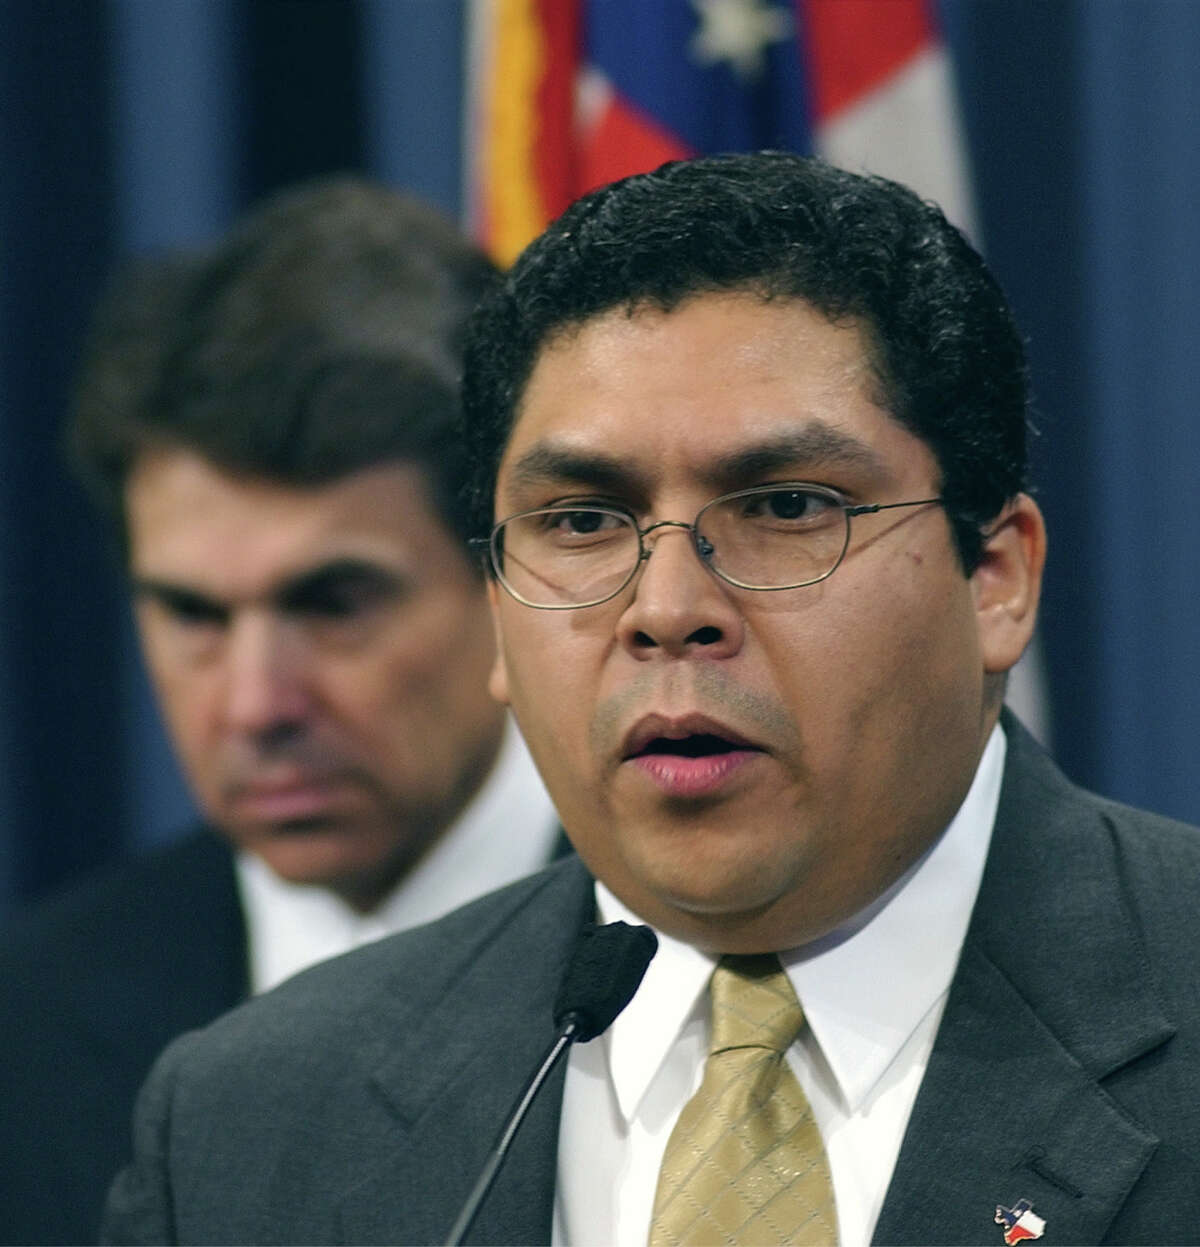 Victor Carrillo, right, speaks after being introduced by Texas Gov. Rick Perry, left, as nominee for the Railroad Commission in 2003. Carrillo has been appointed to the board of directors for Energy Hunter Resources, the Dallas-based company announced on Oct. 14, 2016. (AP File Photo/Harry Cabluck)